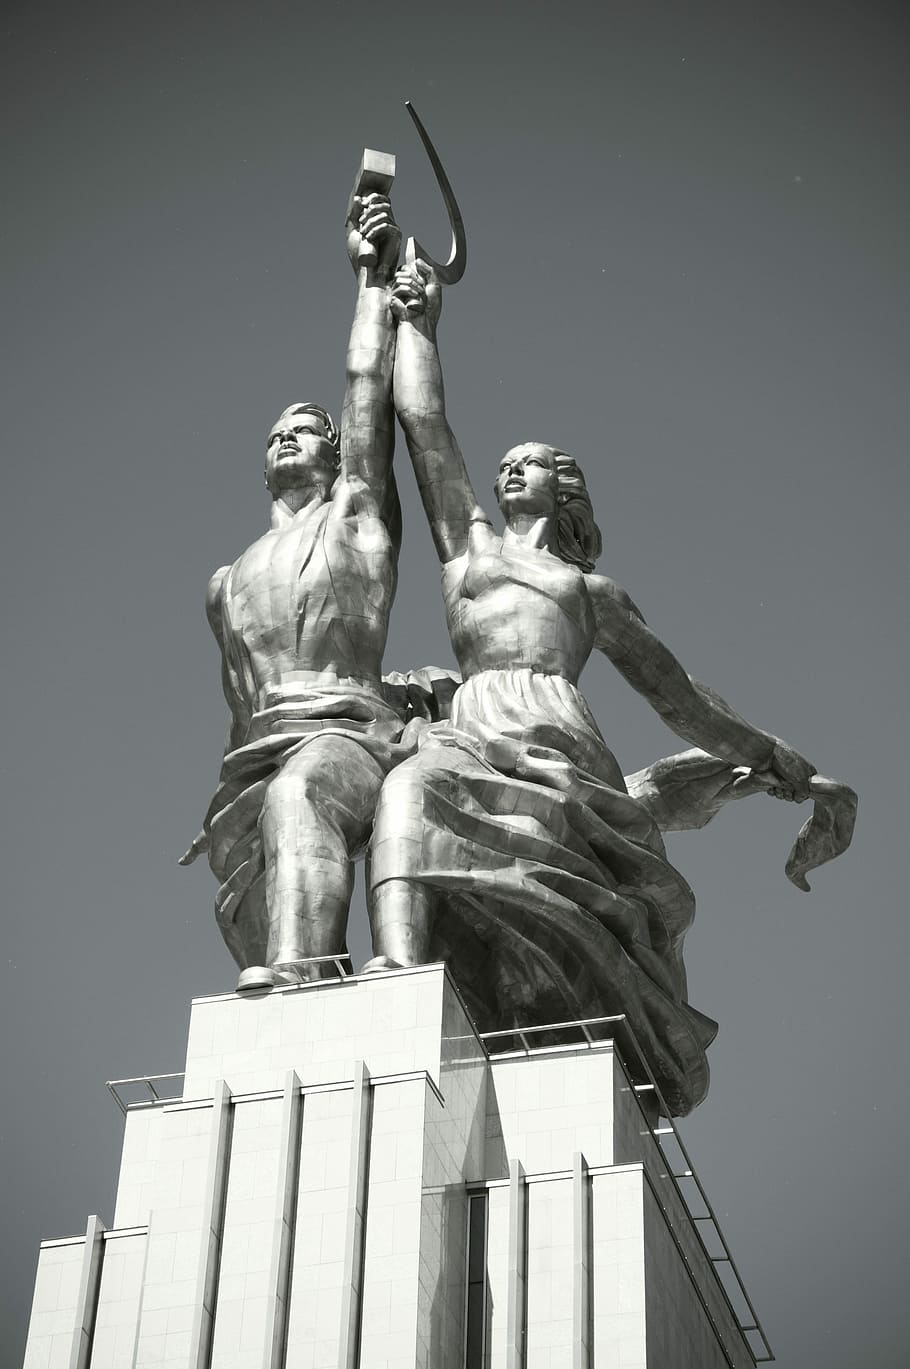 worker, kolkhoz woman, Worker And Kolkhoz Woman, Monument, moscow, soviet union, russia, historically, statue, memory